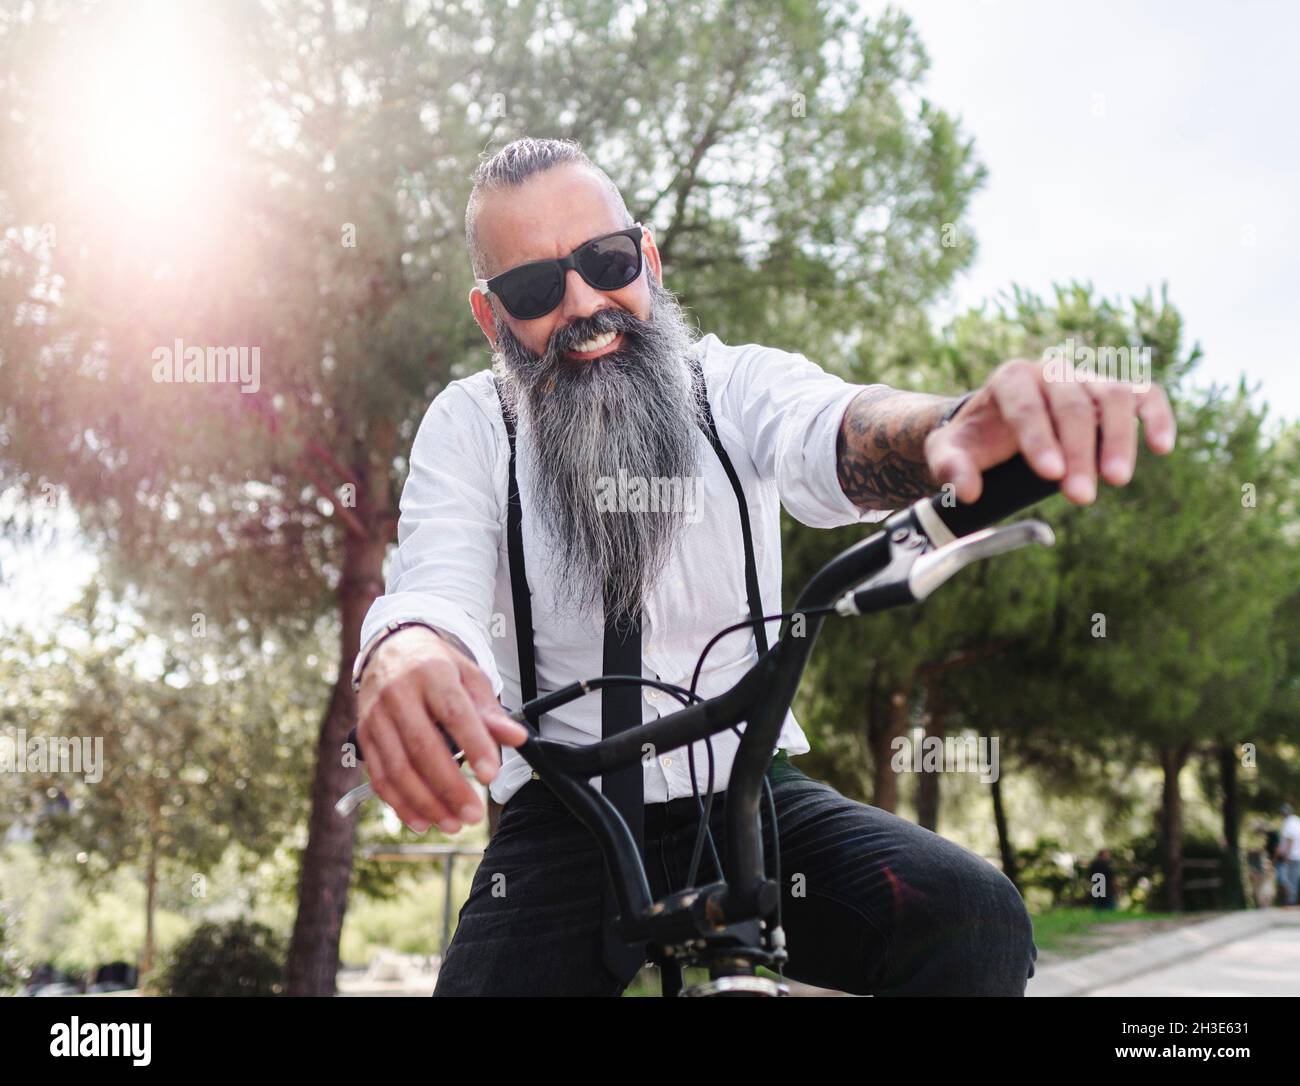 Confident happy male hipster with tattoos in white shirt and sunglasses sitting on bicycle in park with green trees in city Stock Photo